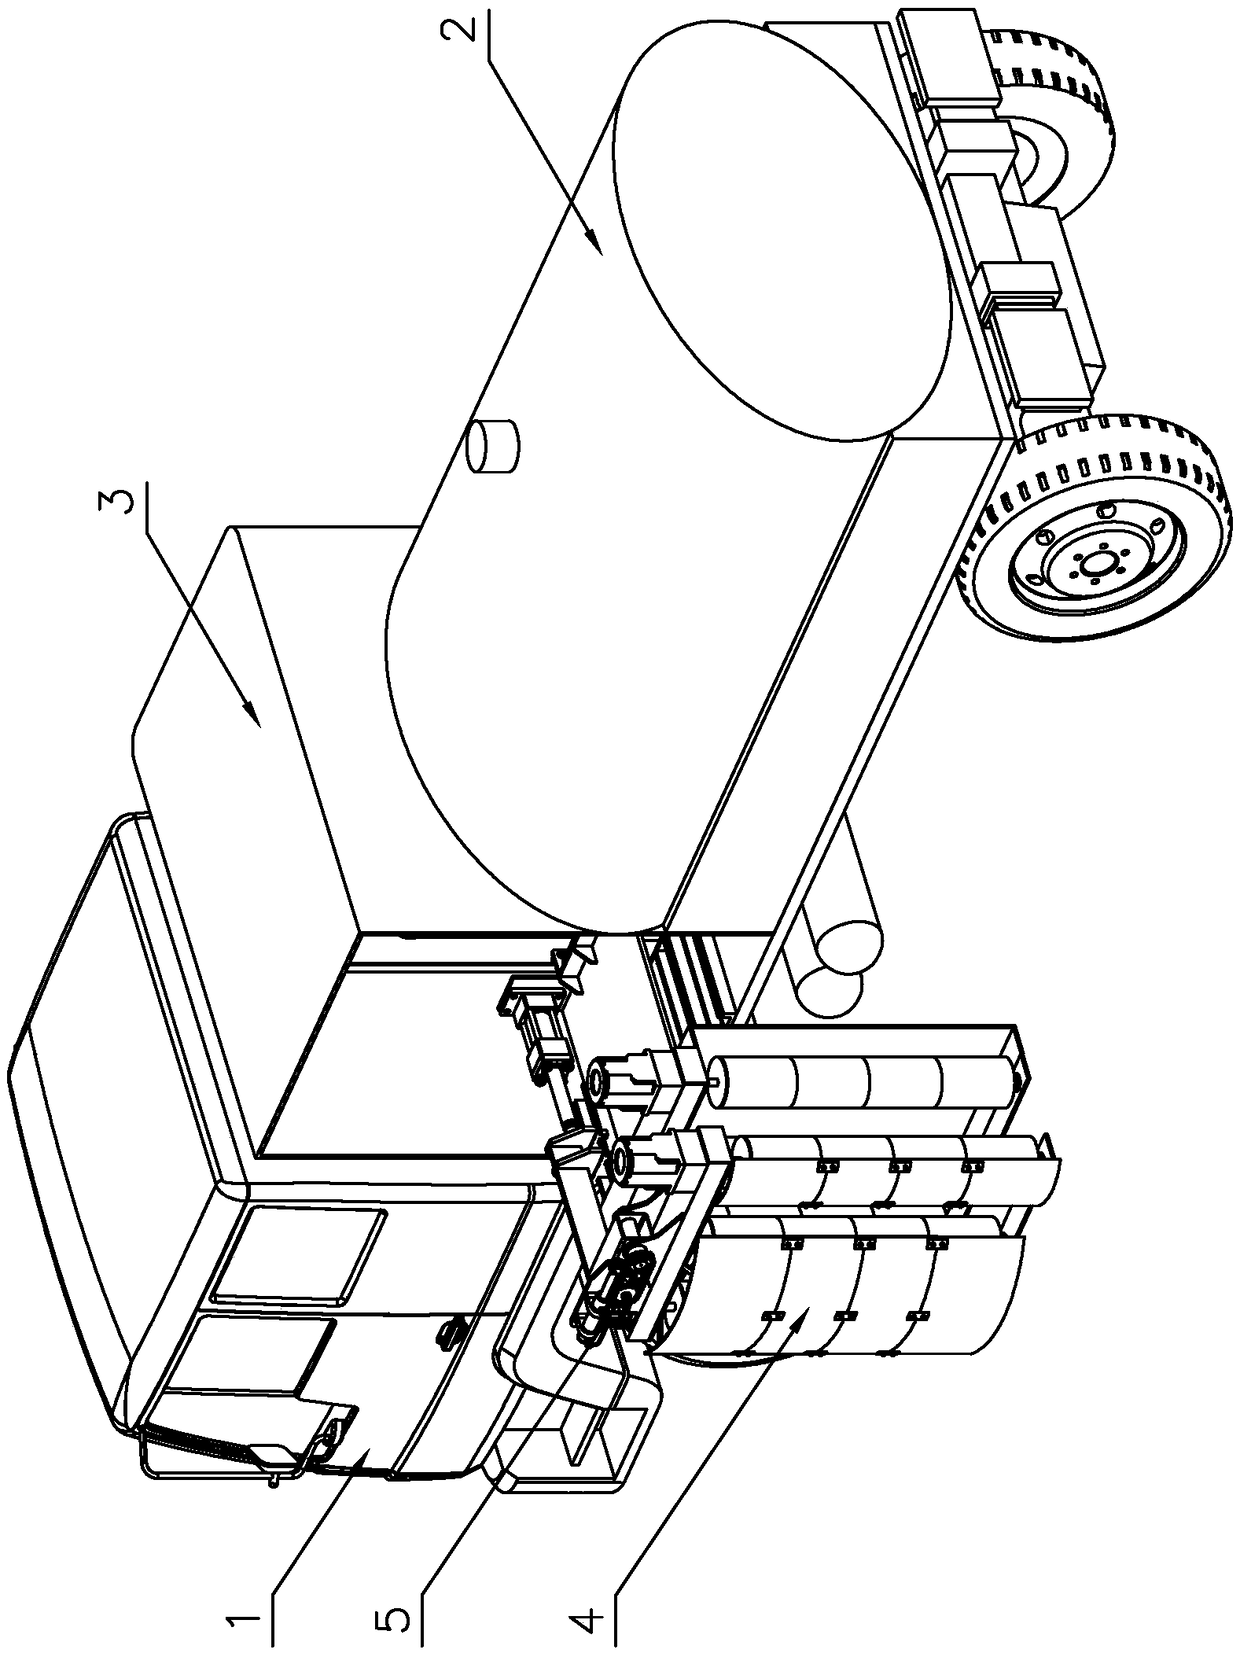 Vehicle-mounted road fence cleaning device for municipal use